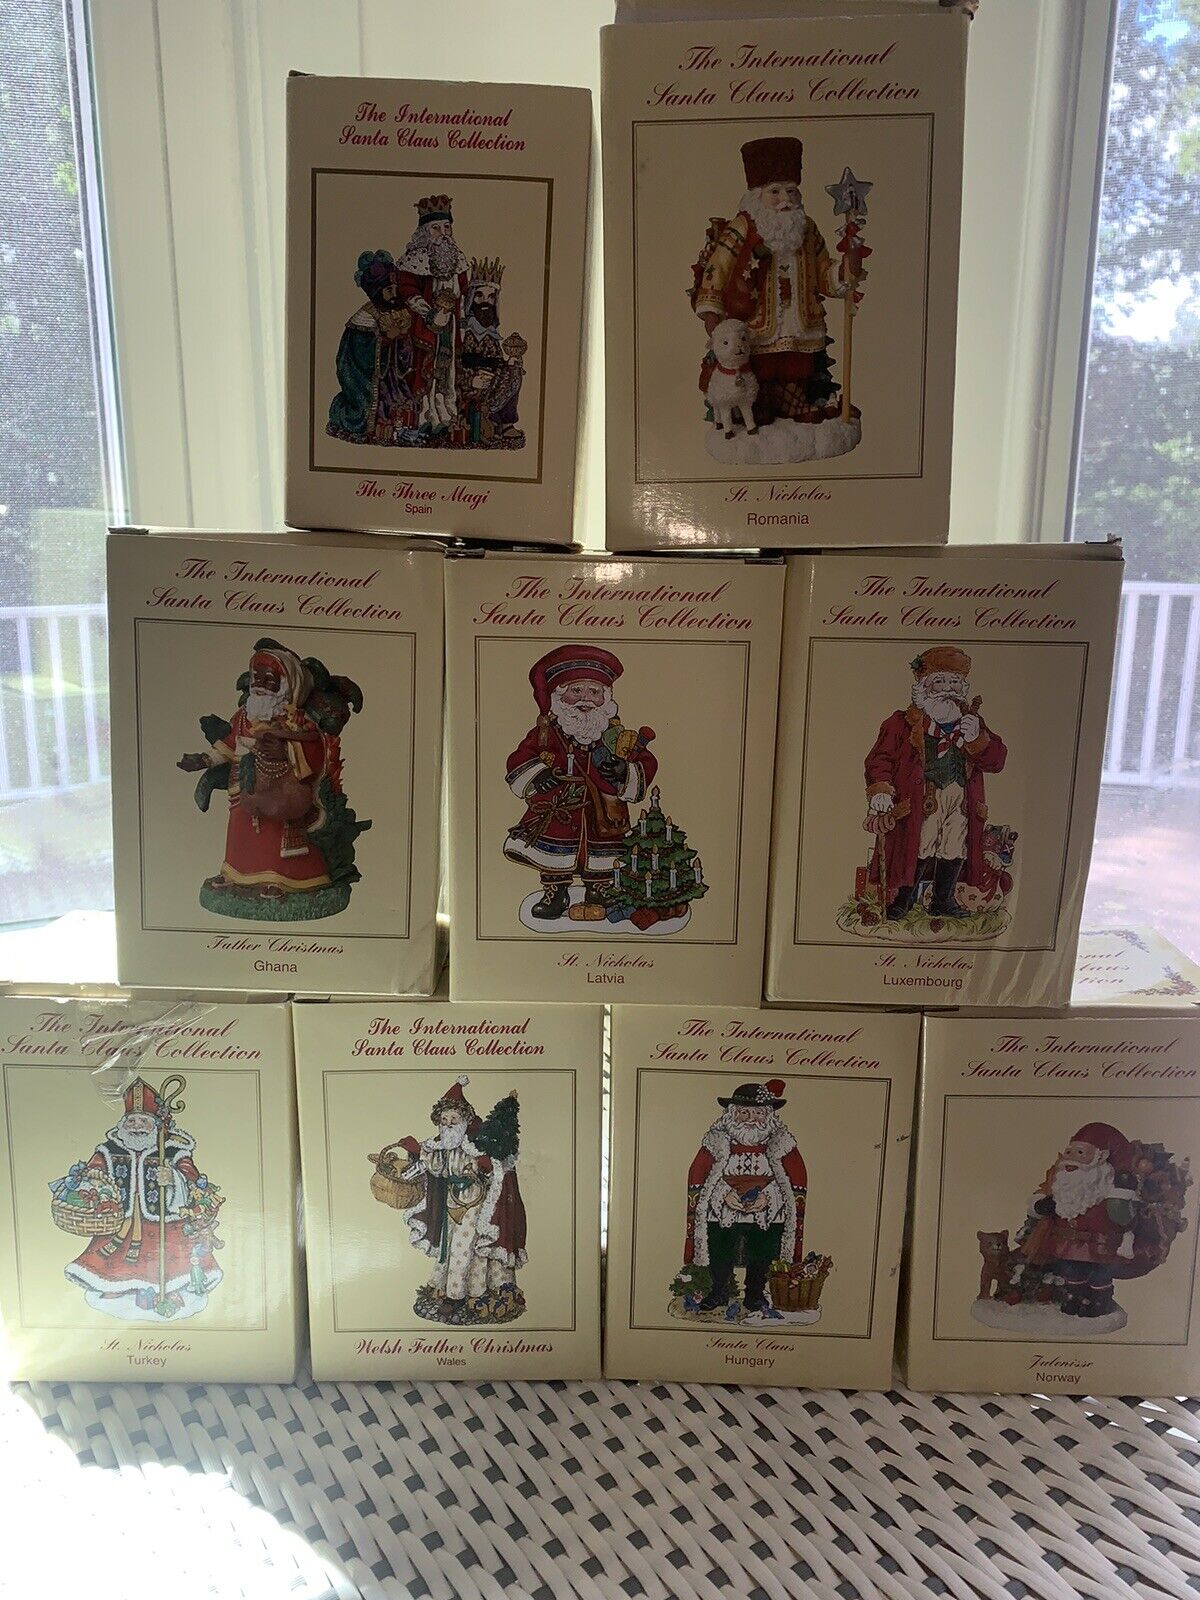 the international santa claus collection All 9 For $100